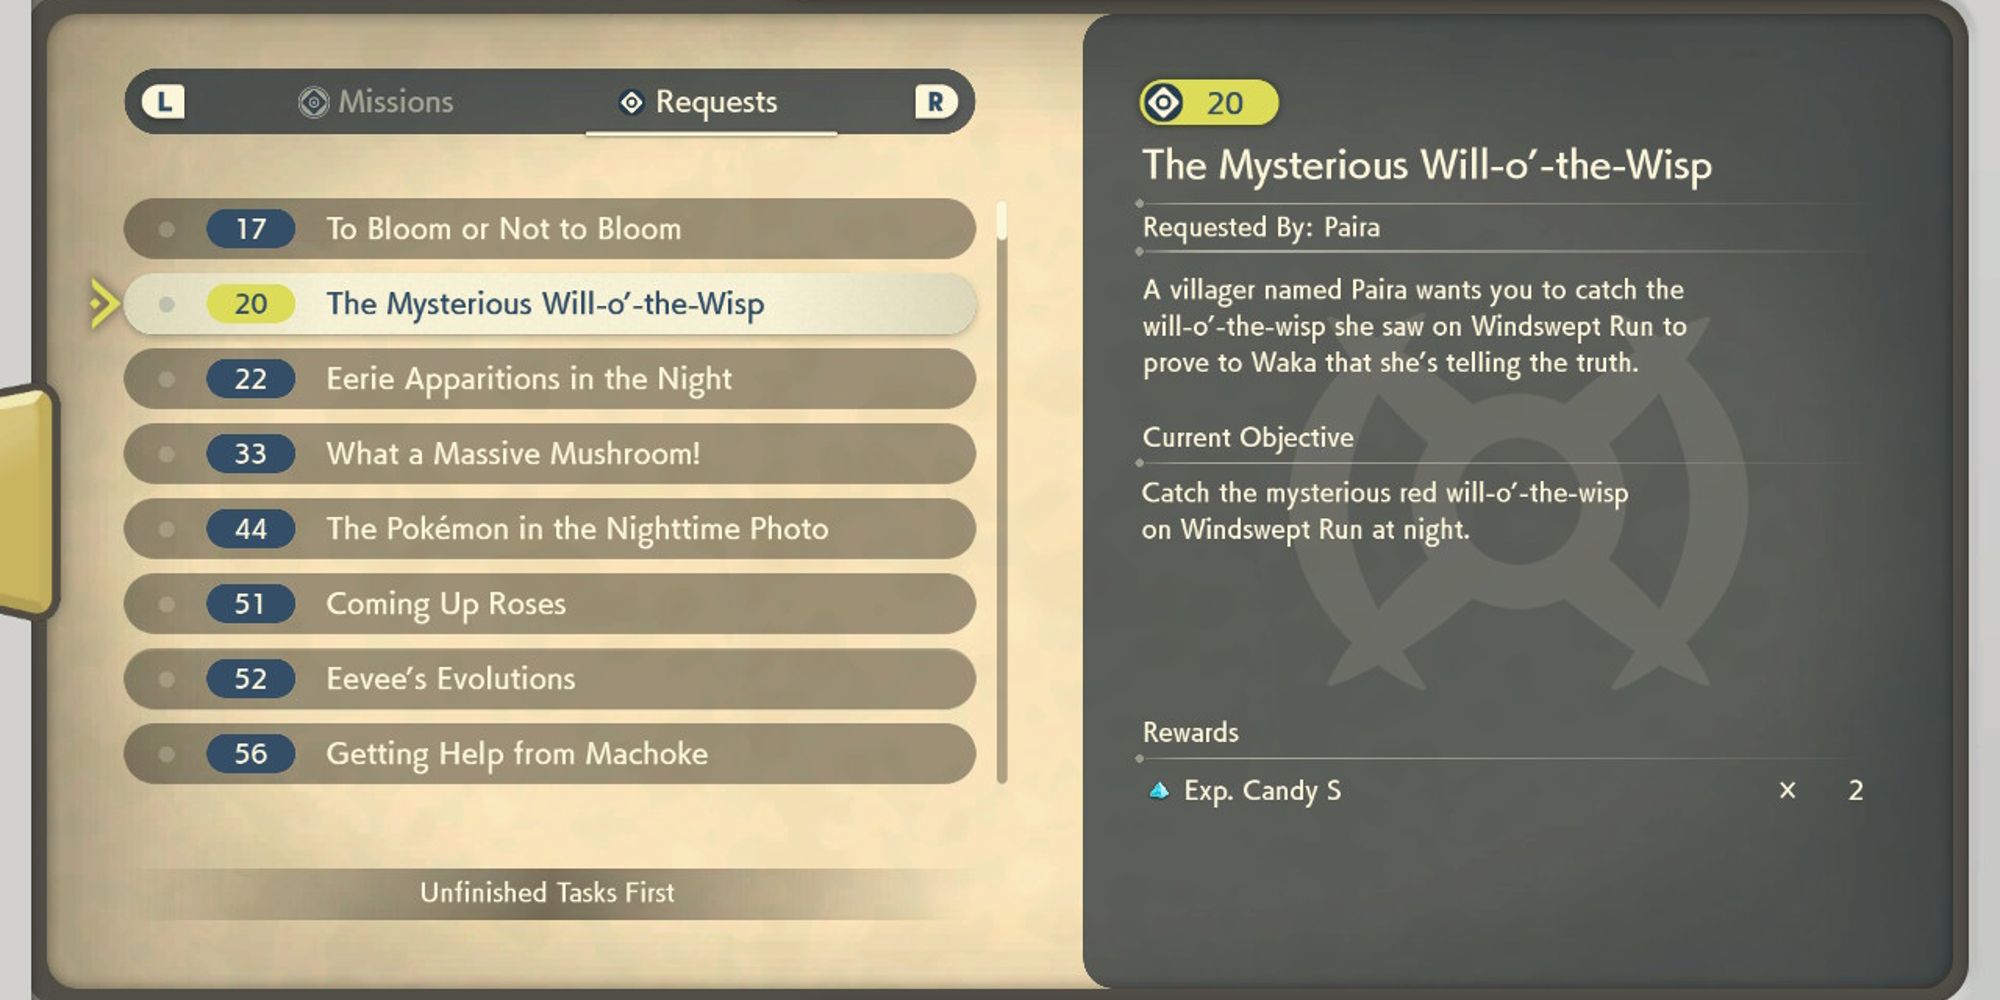 information page for The Mysterious Will-o'-the-Wisp request